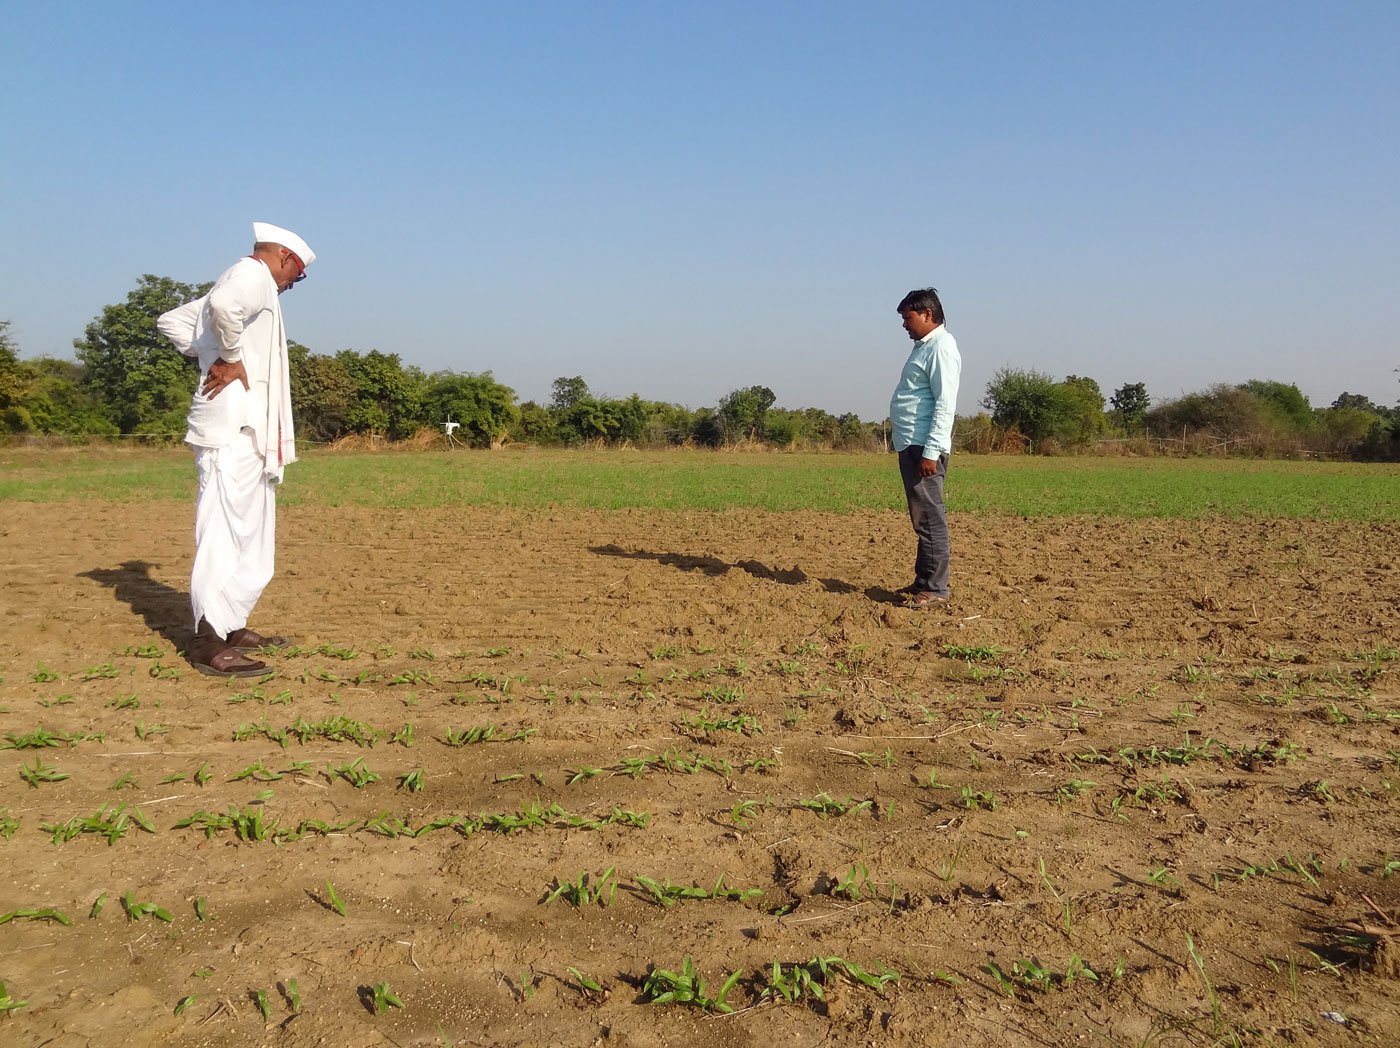 Vitthal Badkhal inspecting the farm of one of his close volunteers, Gopal Bonde in Chiprala village of Bhadravati tehsil , close to the buffer area of the TATR. The farm is set for rabi or winter crop, and already wild animals have announced their arrival on his farm